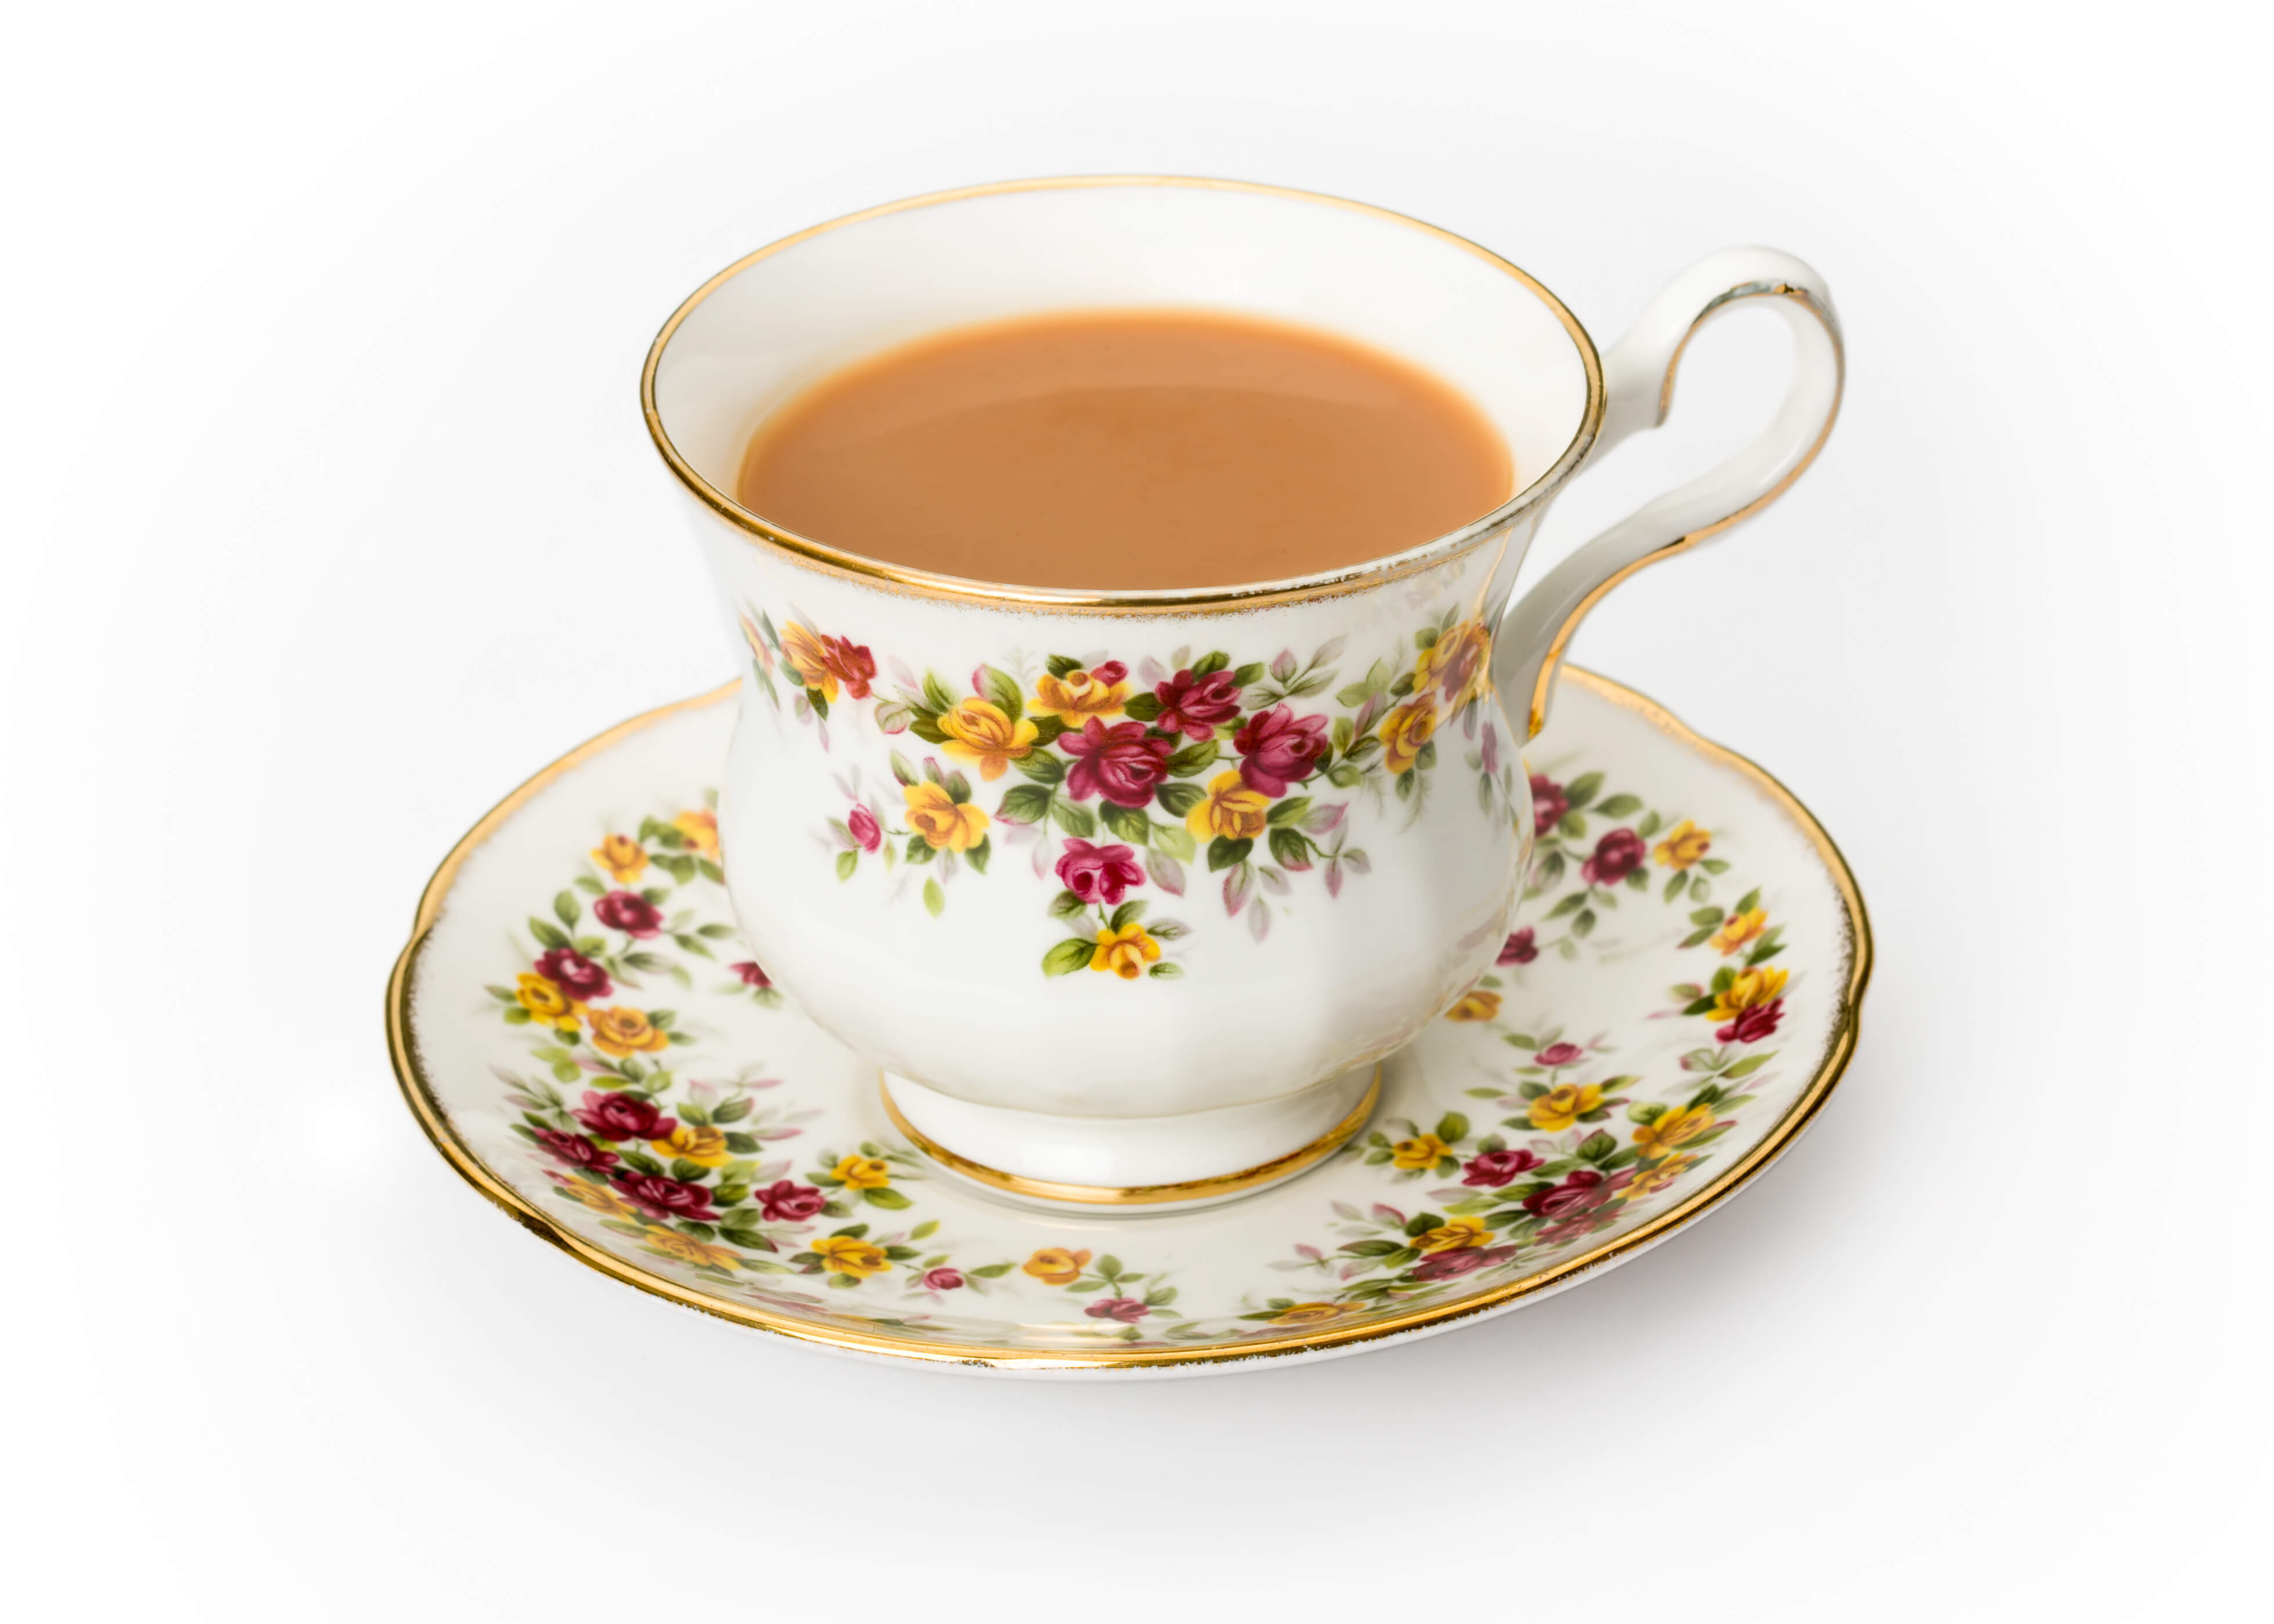 Tea served in a traditional English cup and saucer